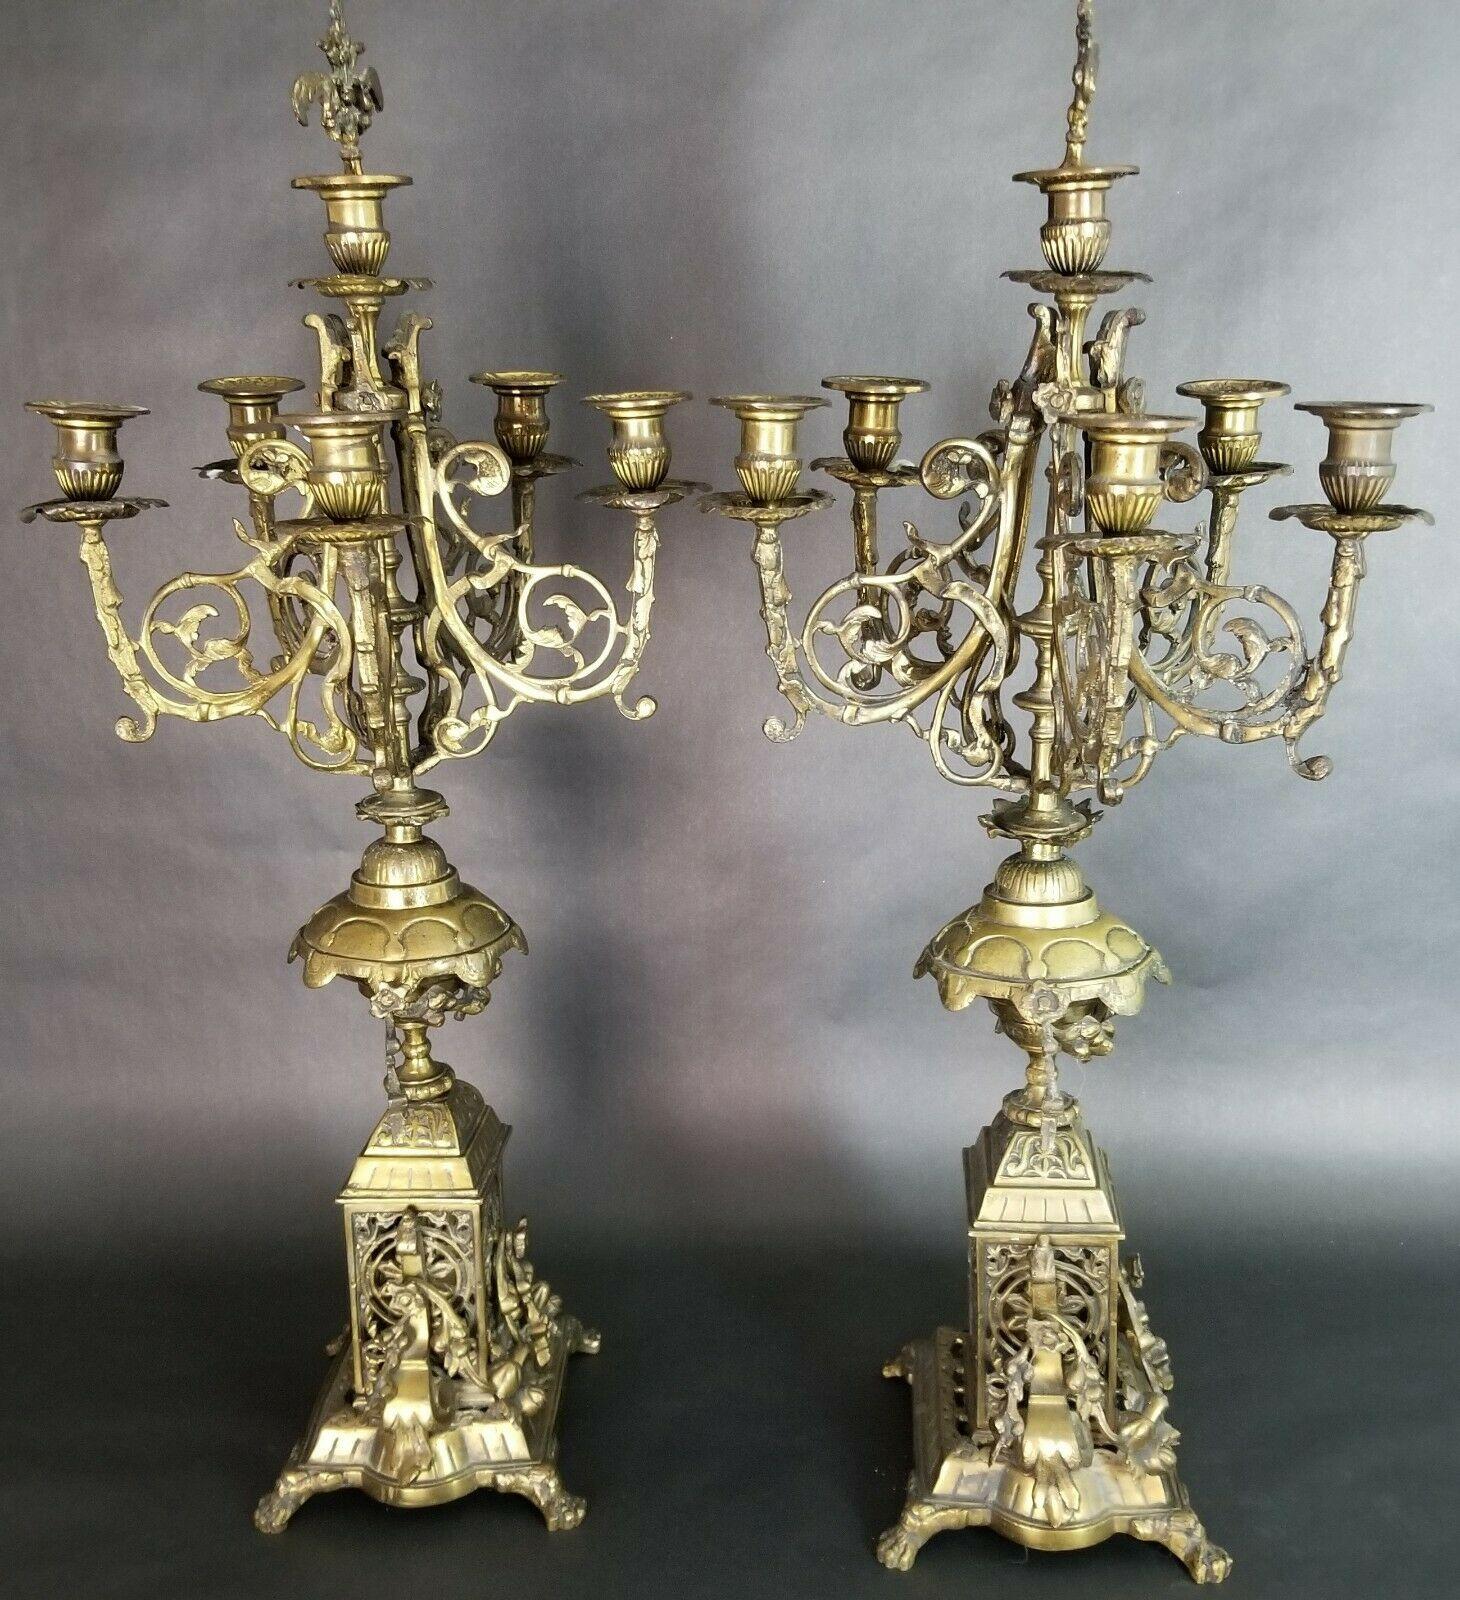 Antique Italian Ornate Bronze French Louis XV Rococo 6 Point Candelabras In Good Condition For Sale In Lake Worth, FL